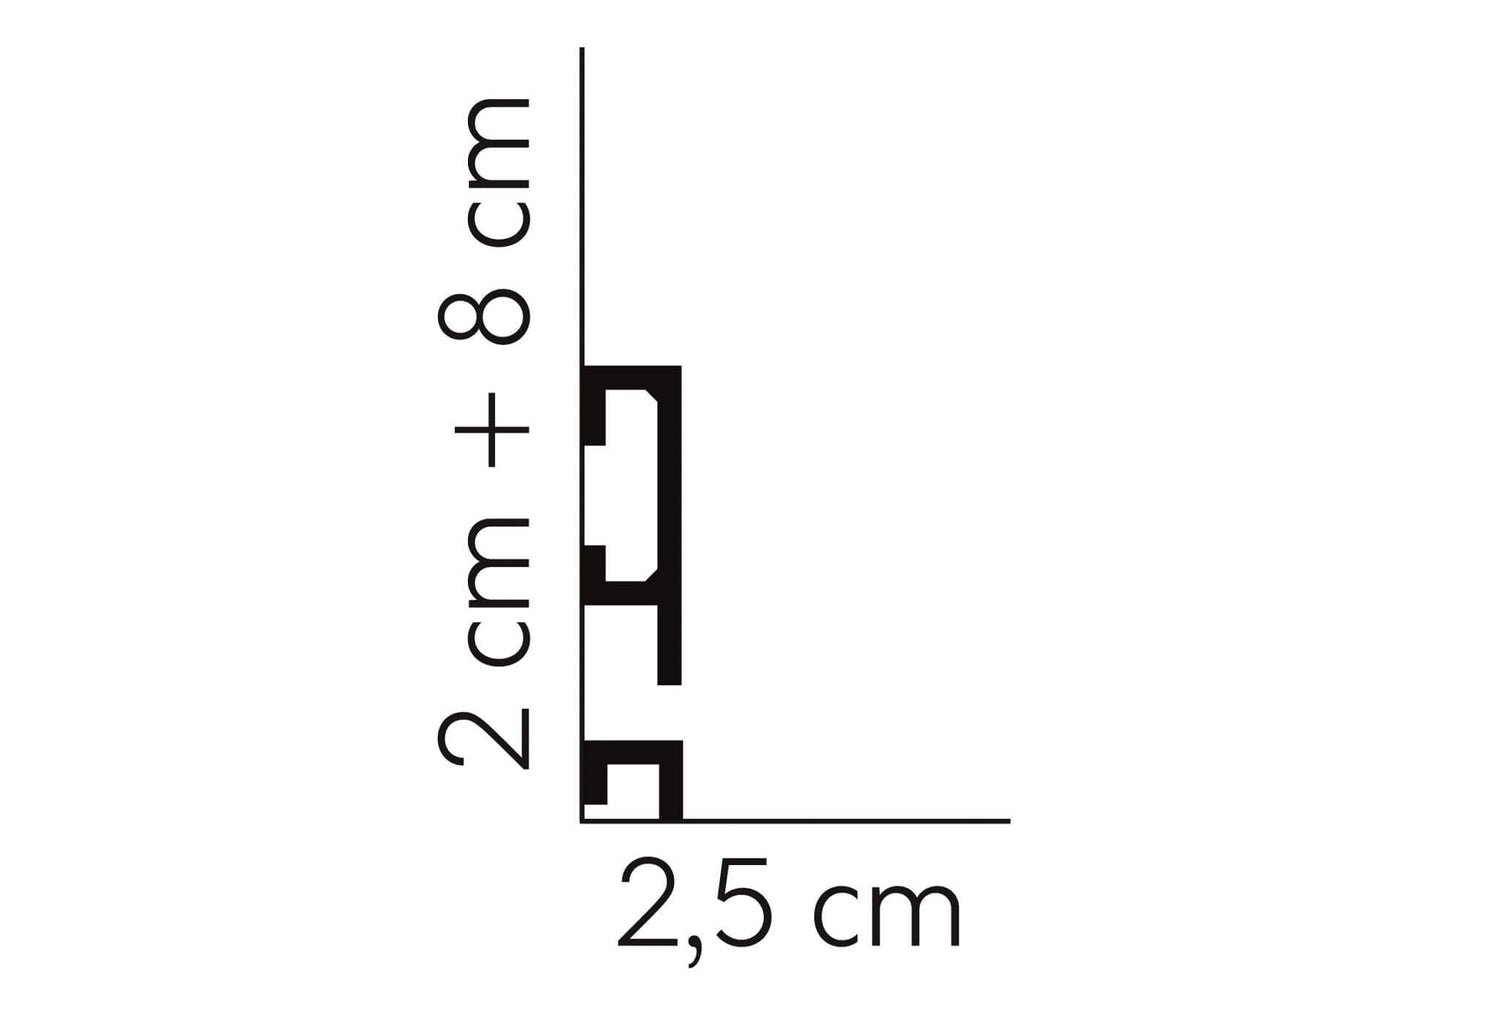 Graphic showing QL040P - Skirting Board's two pieces together is 2cm + 8cm in height and 2.5cm width